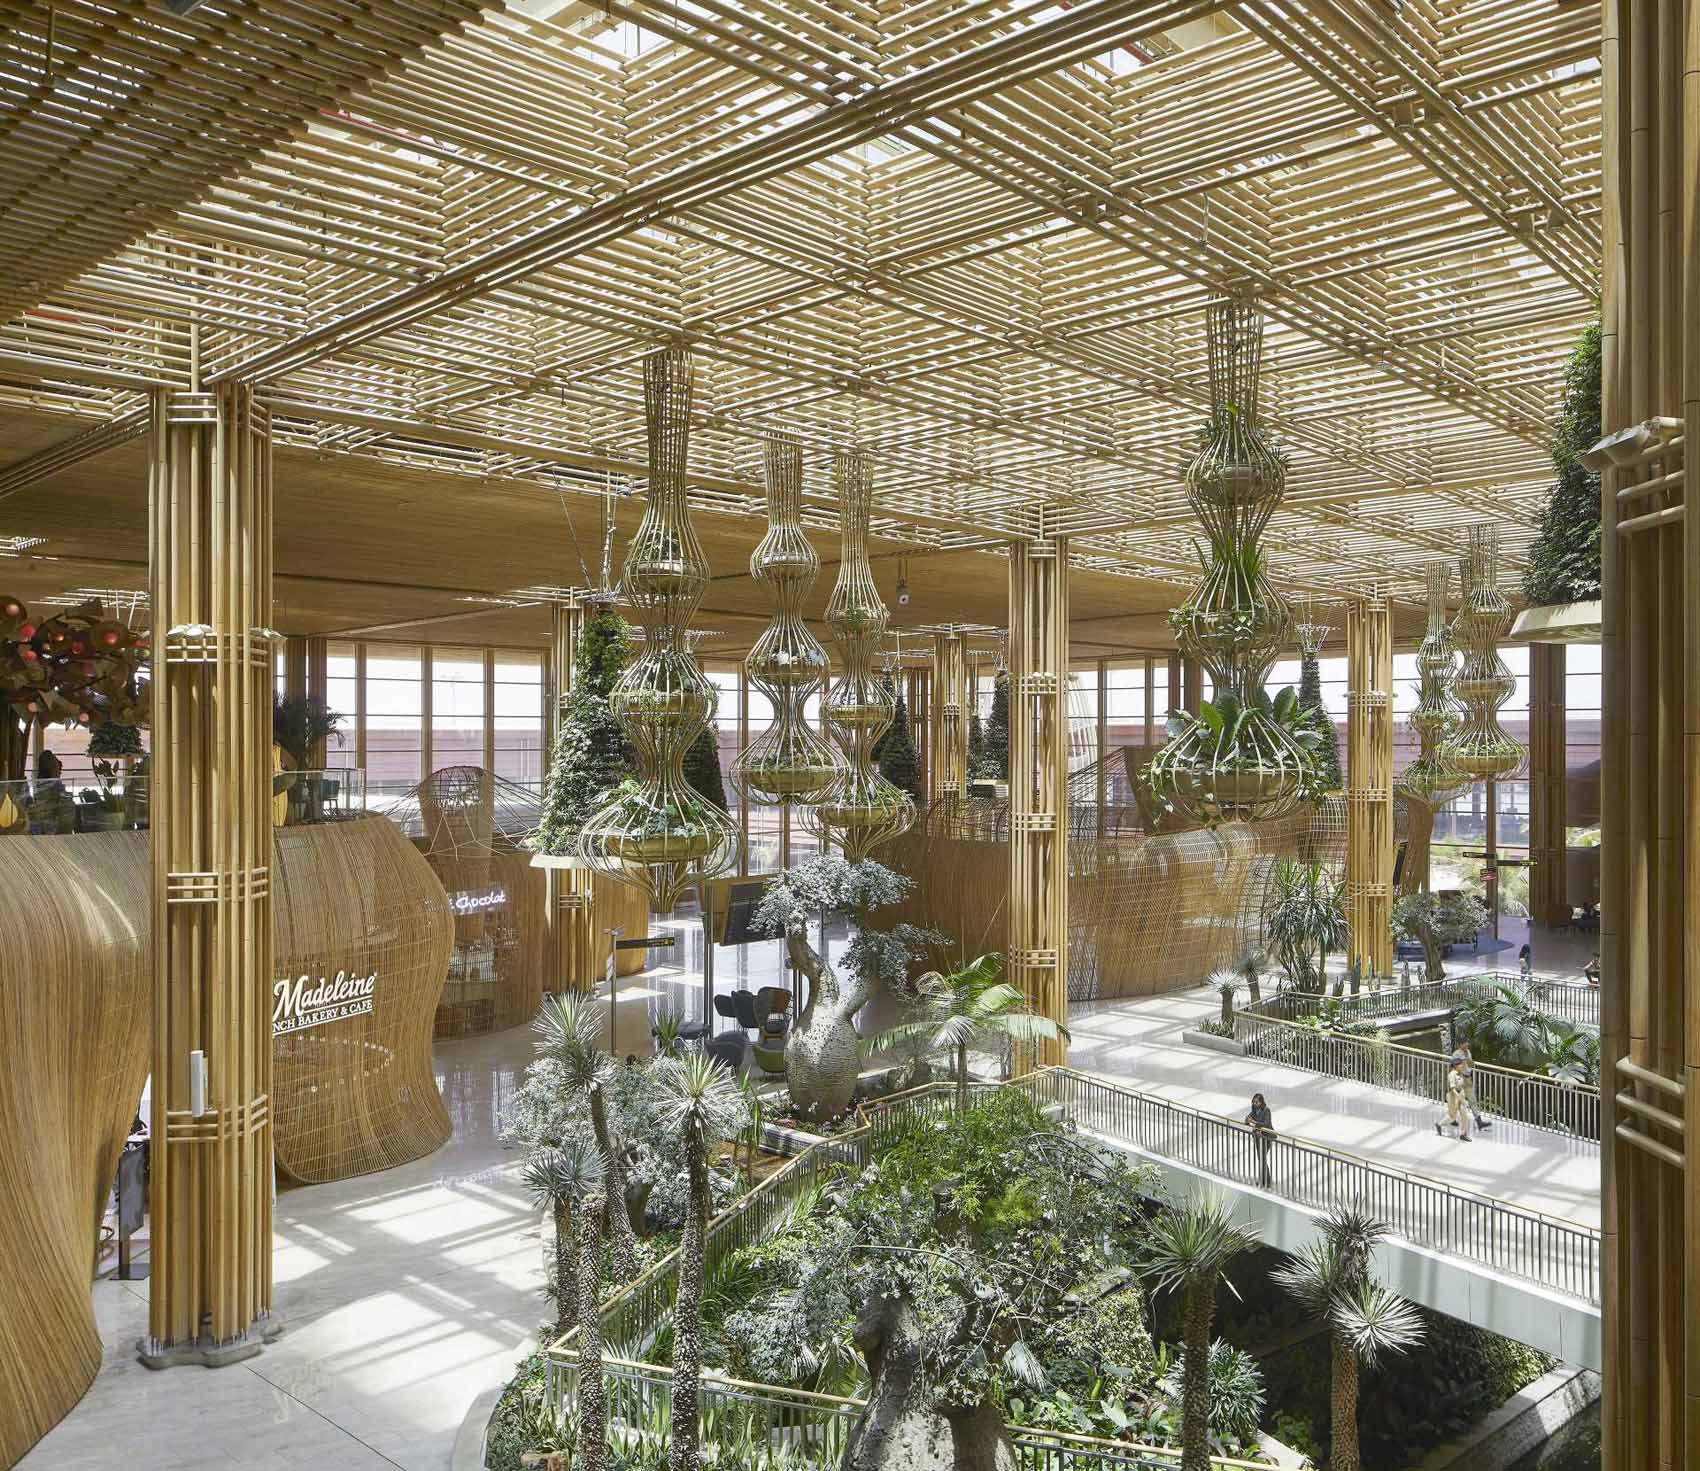 The interior of Bengaluru International Airport features over 5 miles (9km) of rattan that makes up pods and sculptures.